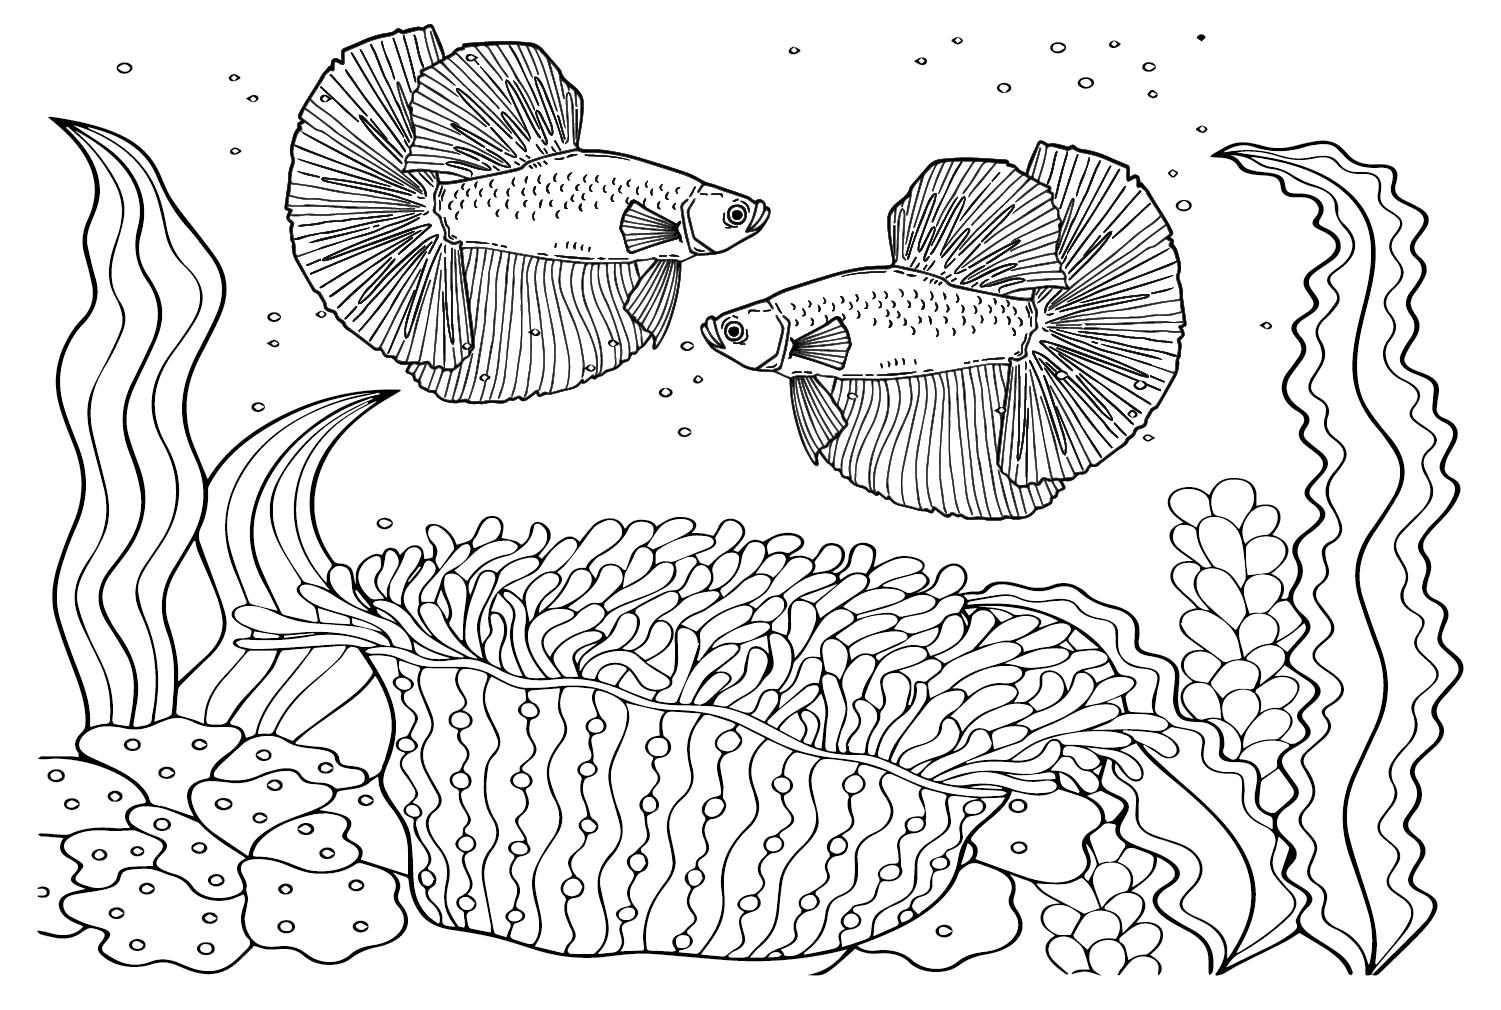 Betta Fish Printable Coloring Page - Free Printable Coloring Pages